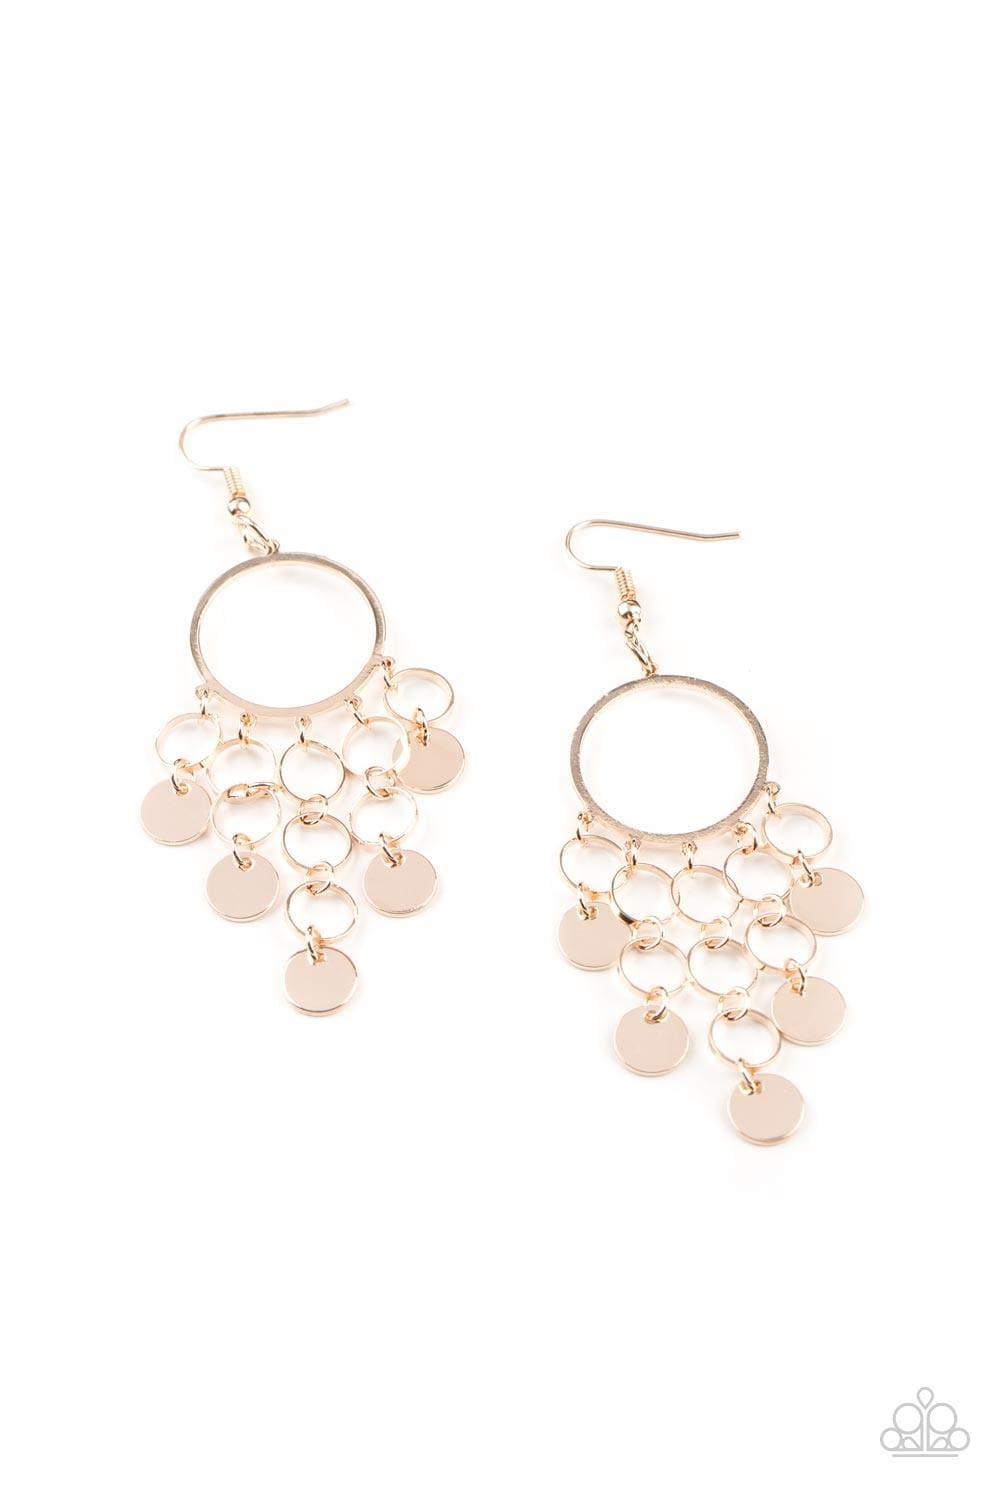 Paparazzi Accessories - Cyber Chime - Rose Gold Earrings - Bling by JessieK